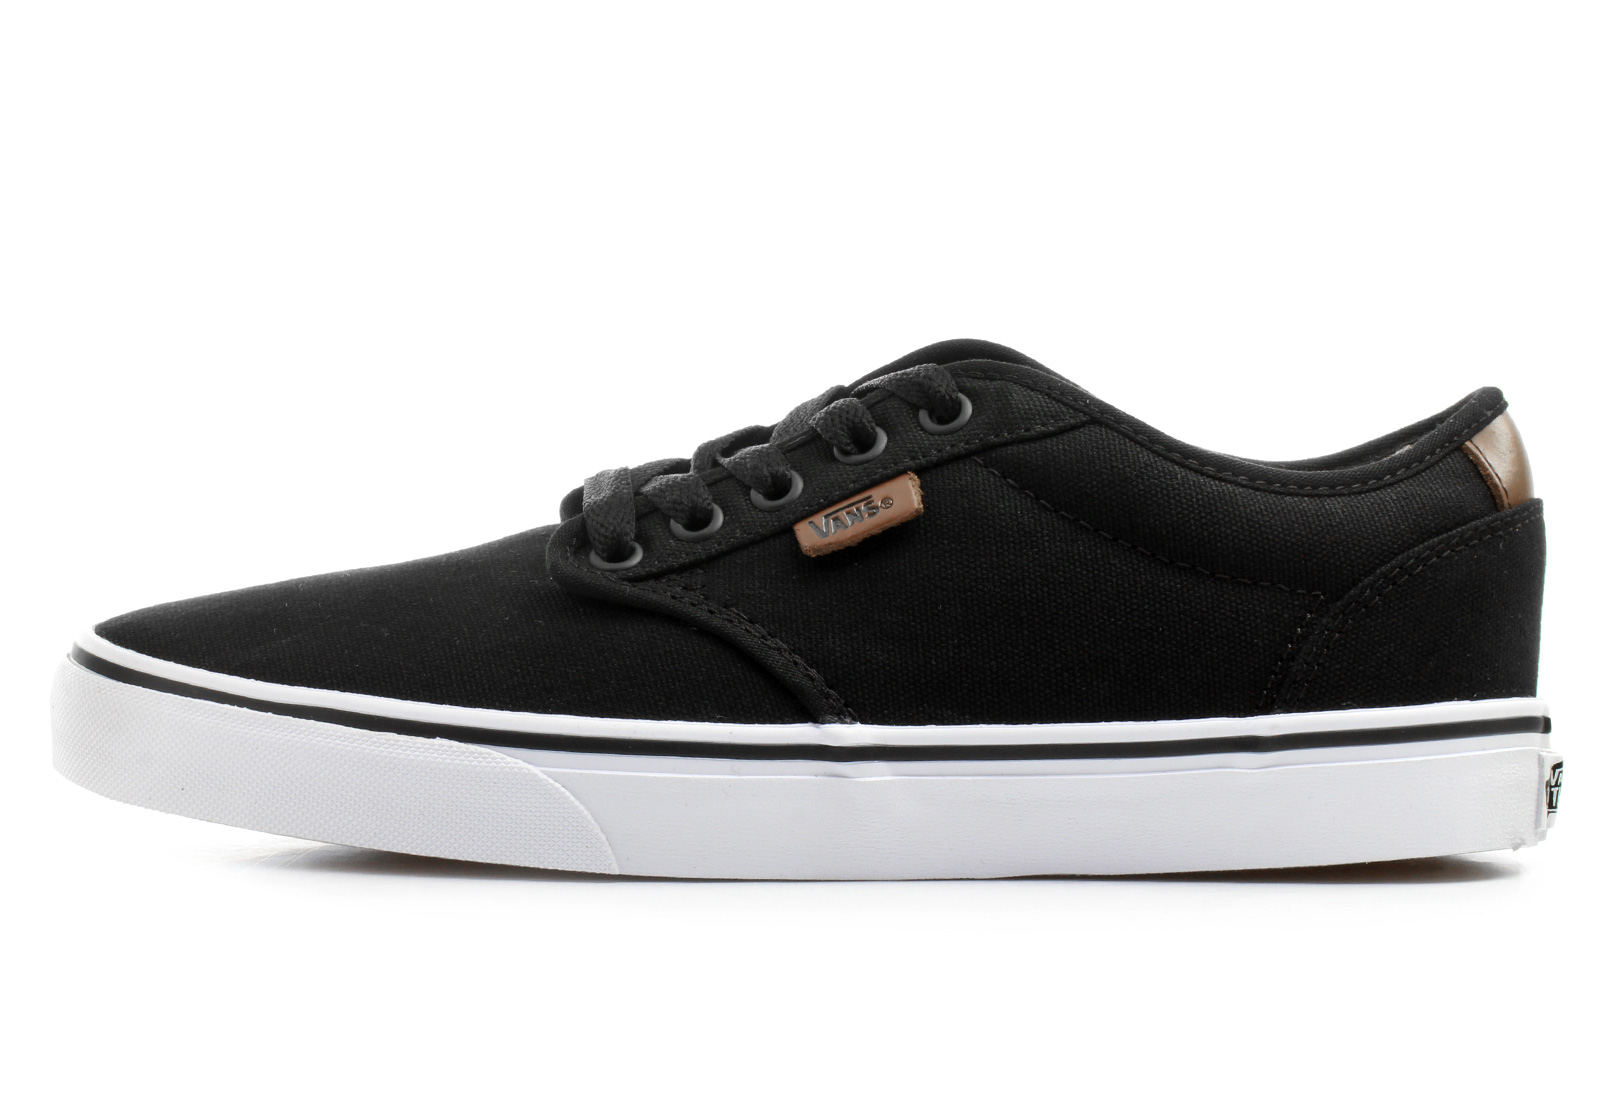 Vans Sneakers - Atwood Deluxe - VXB2D8A - Online shop for sneakers ...